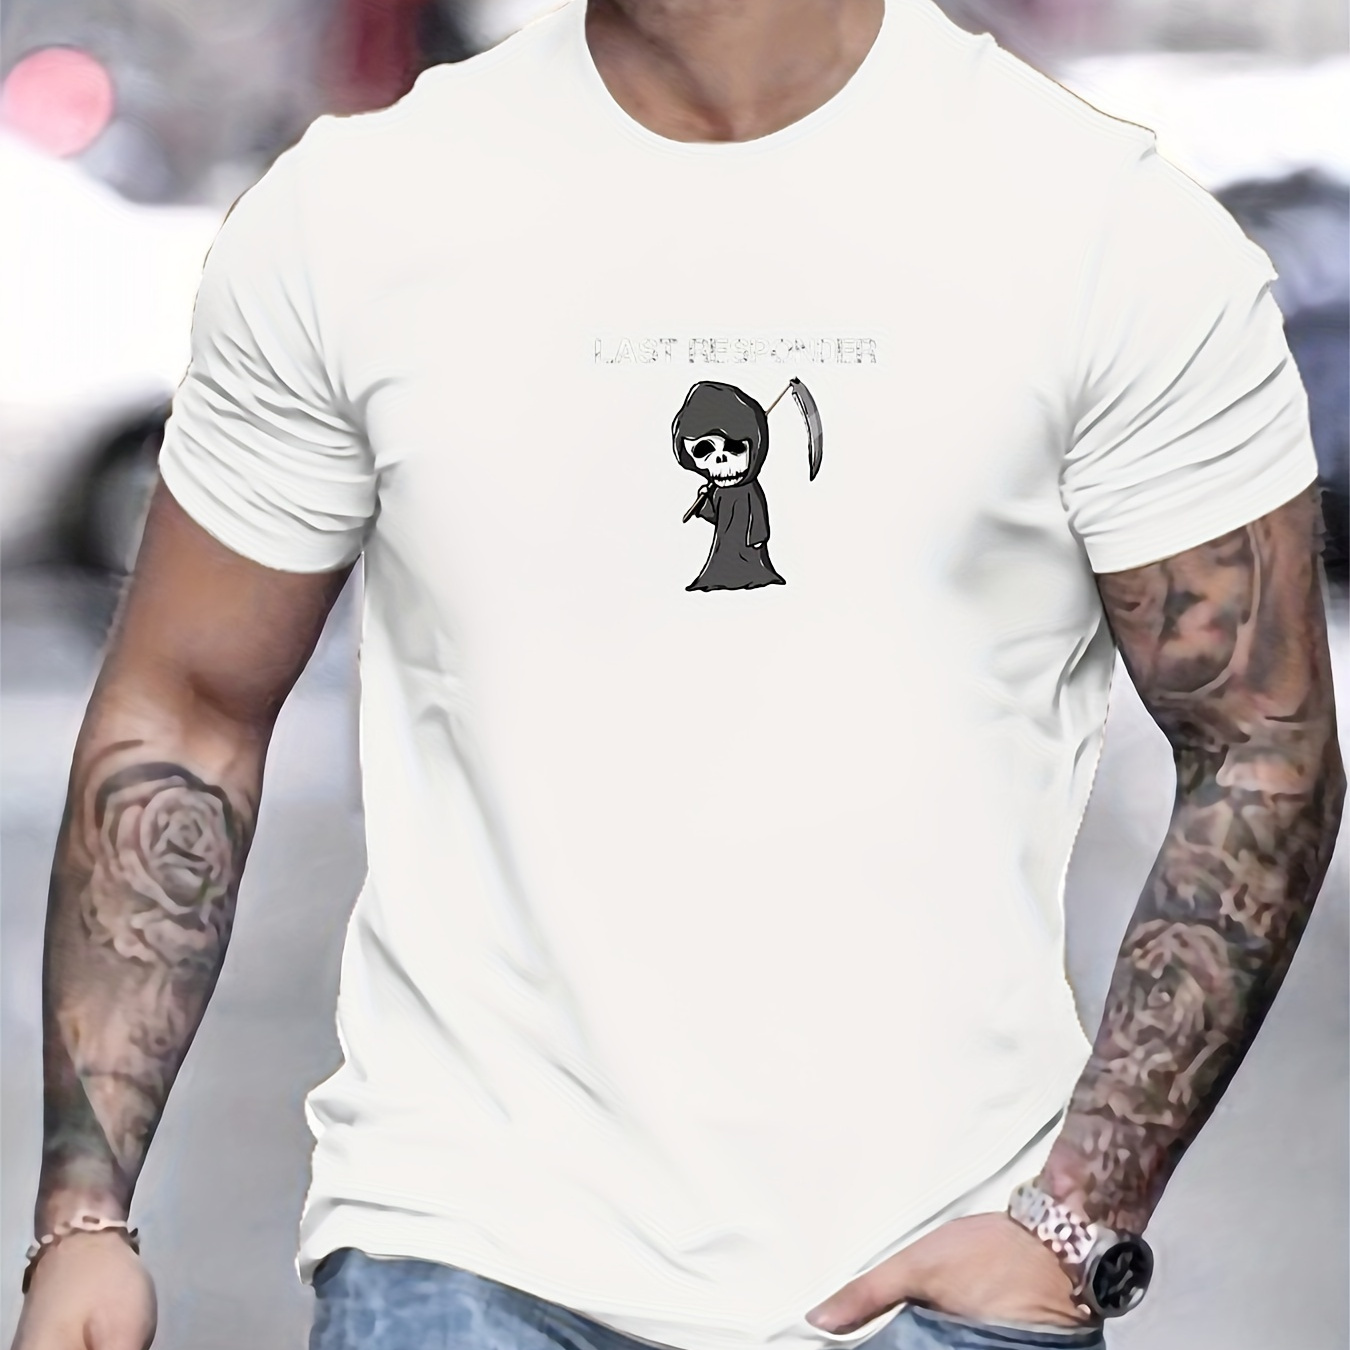 

' Last Responder ' Letters And Cartoon Grim Reaper Pattern Print Men's Crew Neck Short Sleeve T-shirt, Summer Breathable Lightweight Top For Outdoor Fitness & Daily Commute